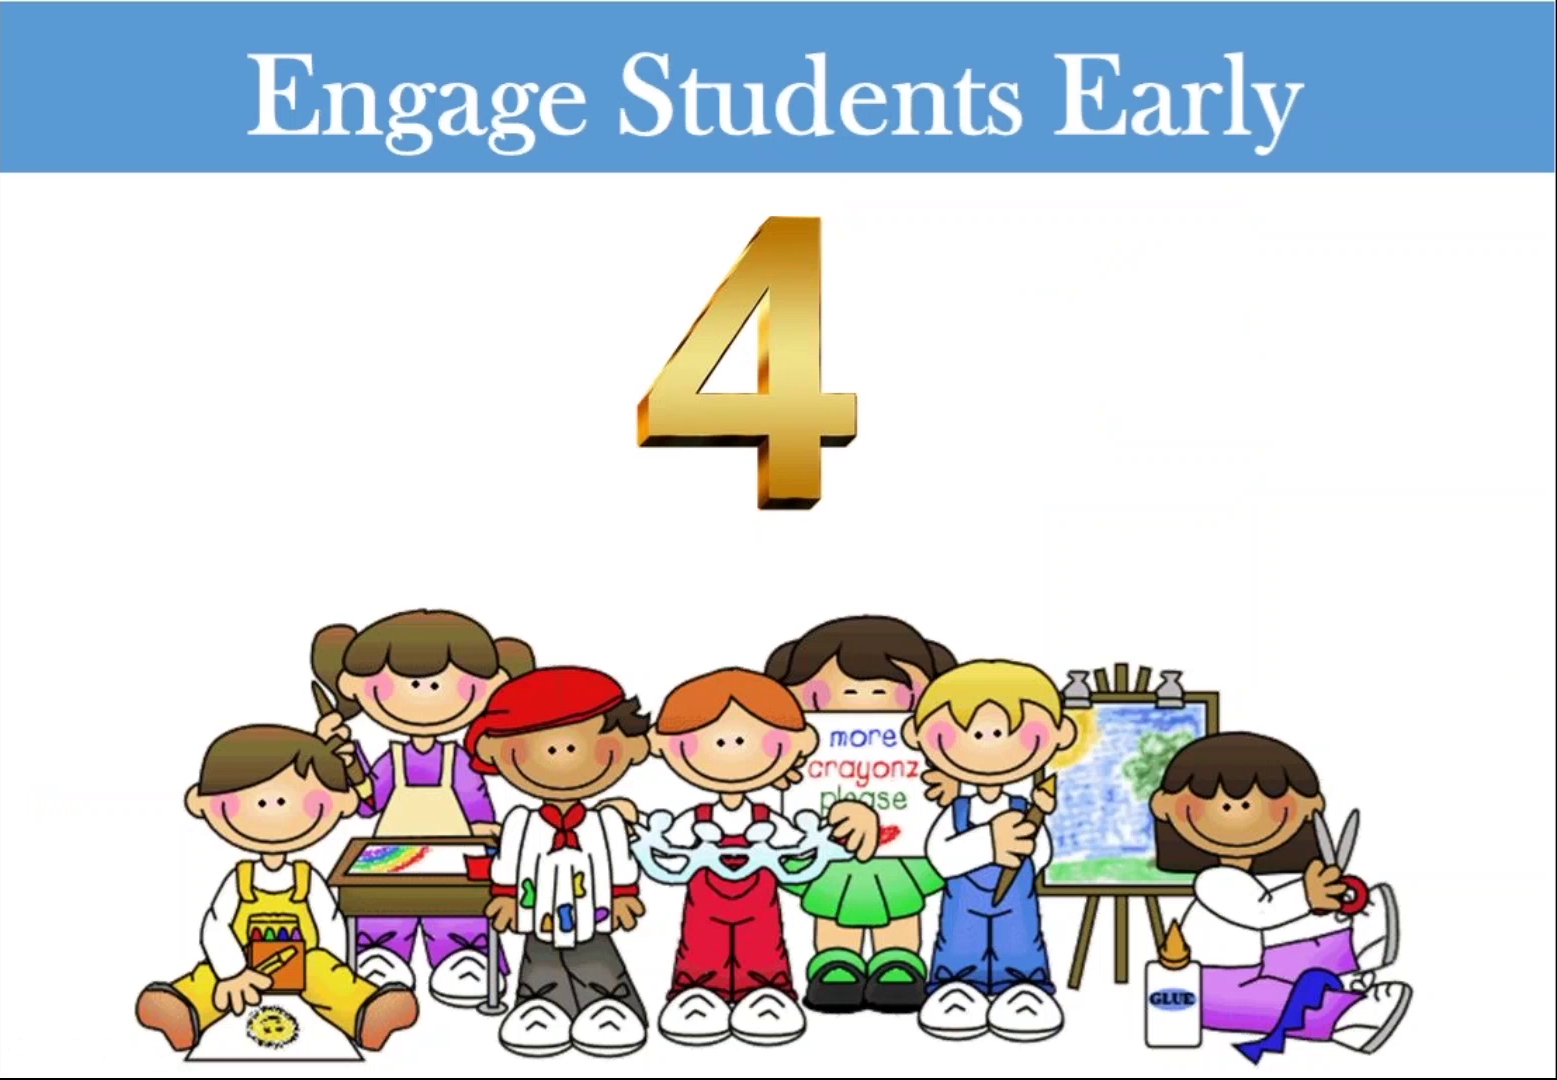 Engaging students early